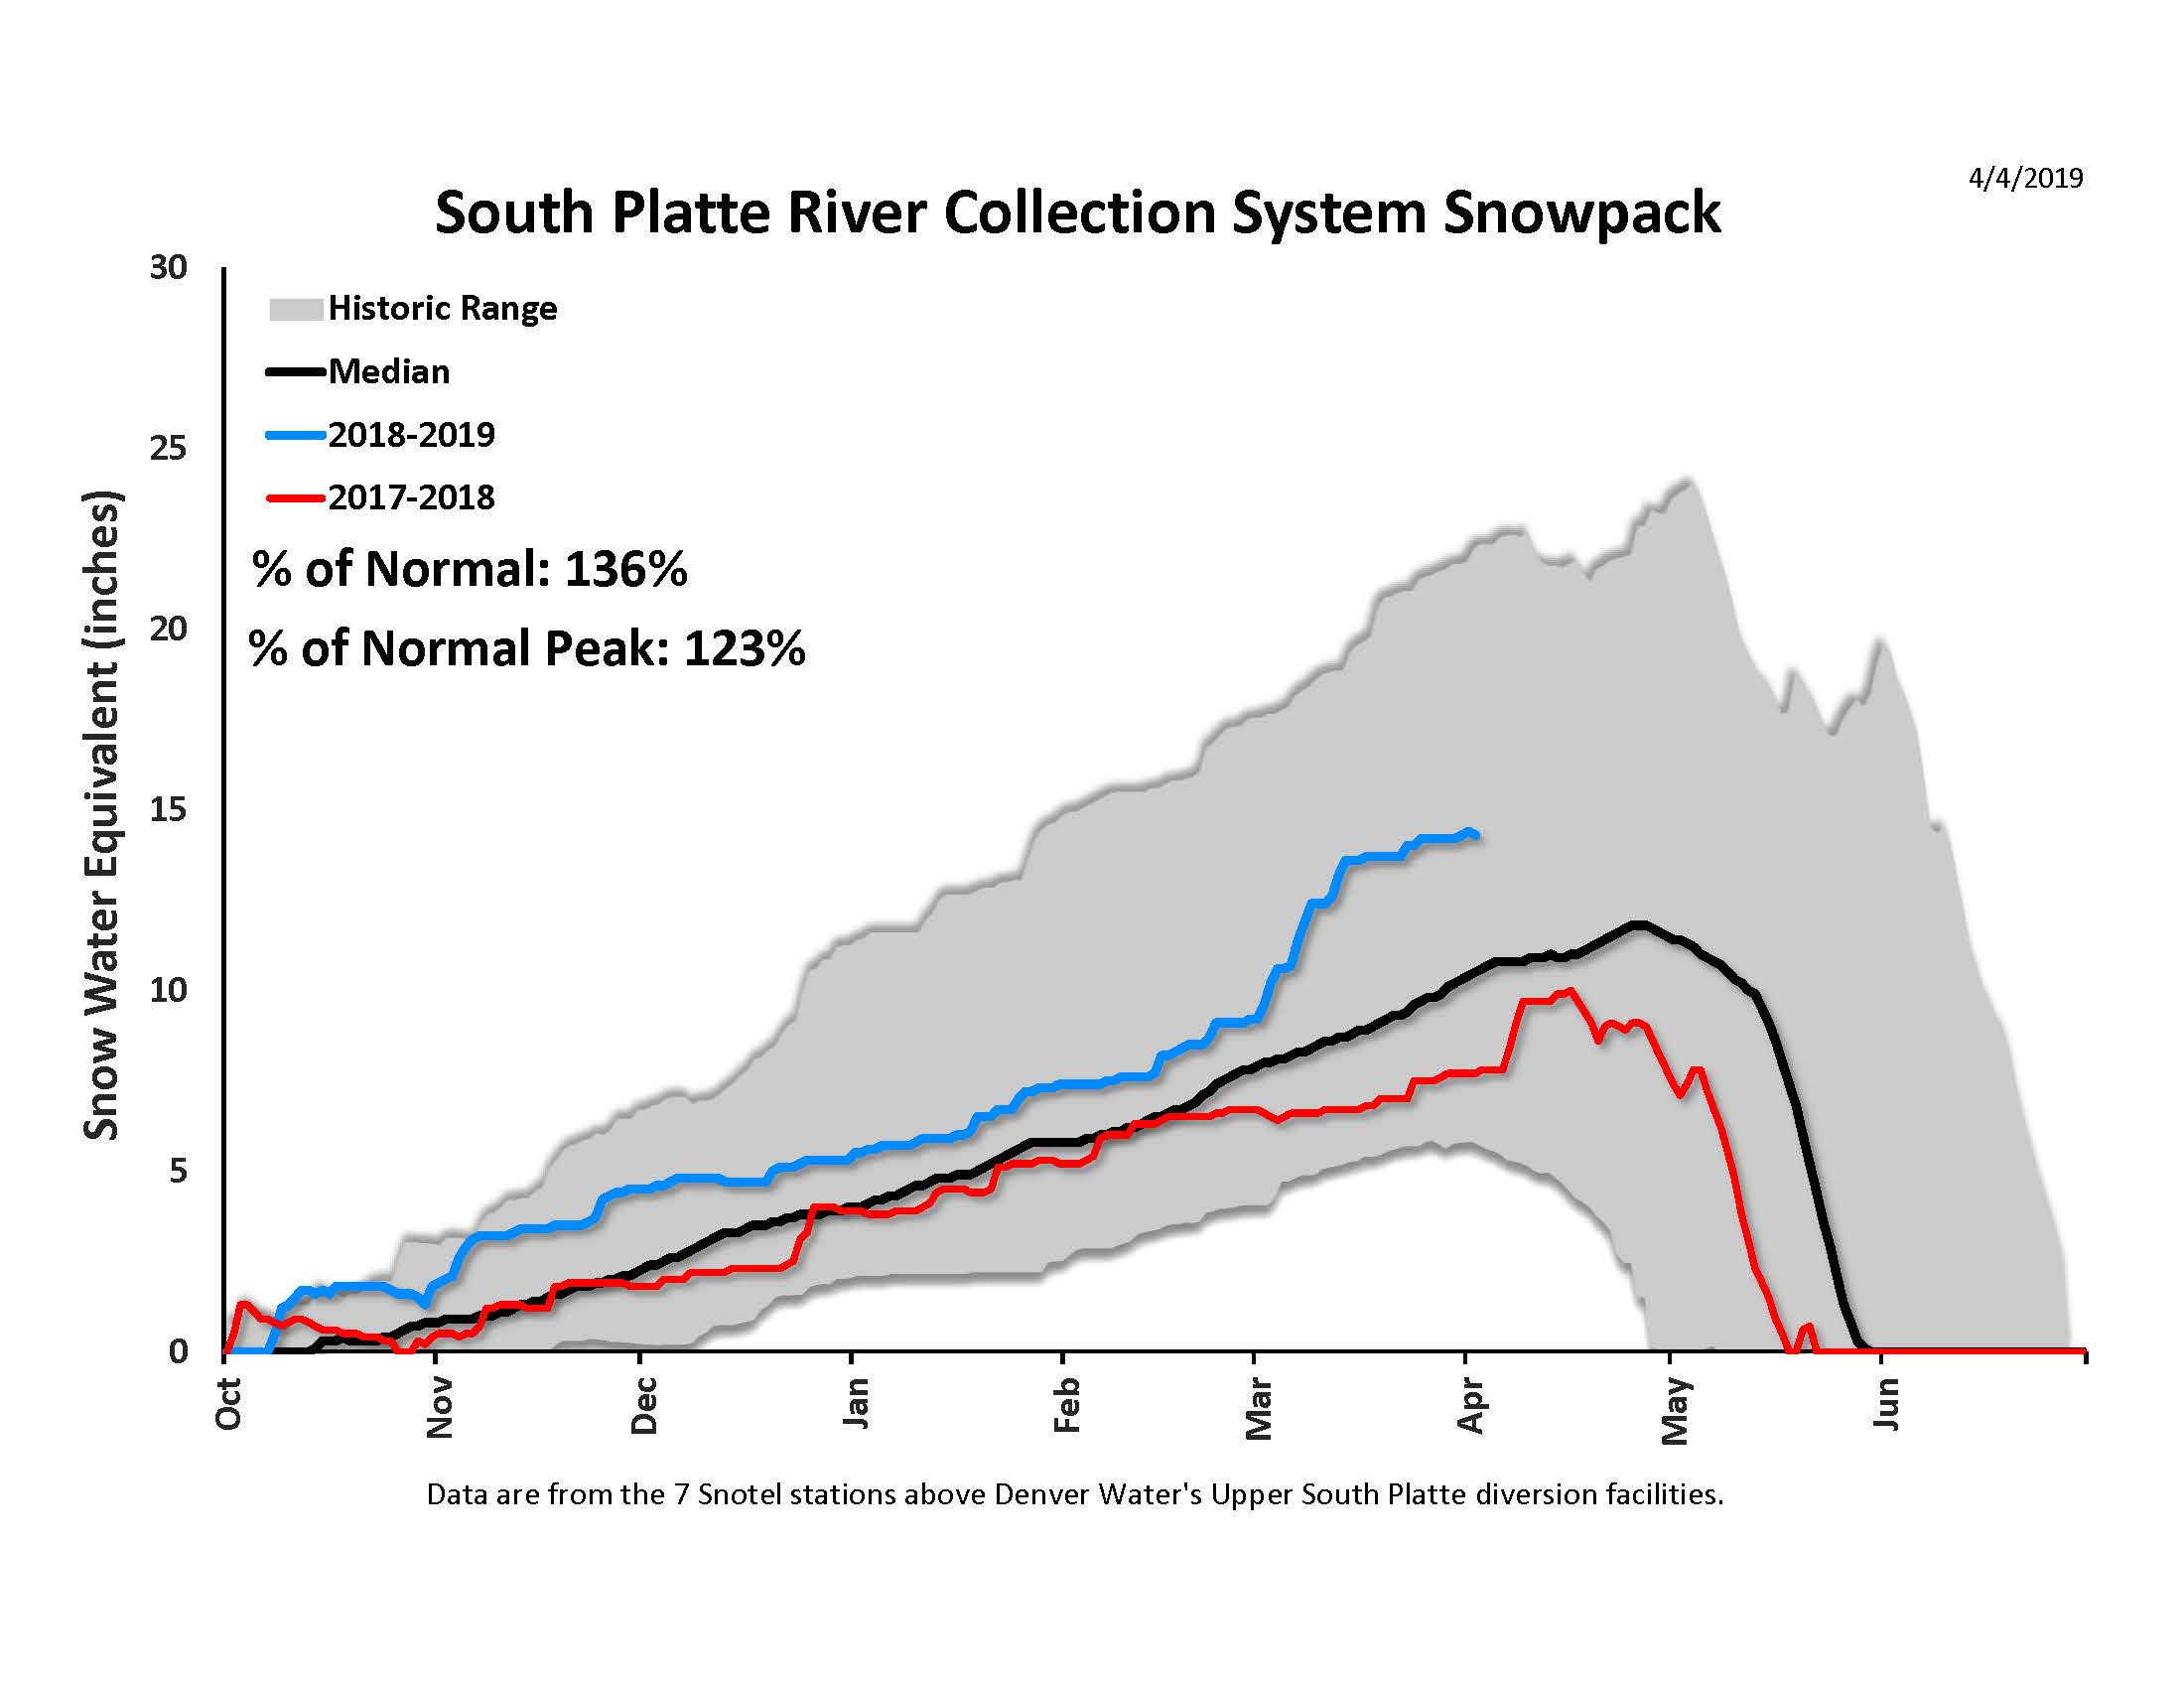 Snowpack in the South Platte River basin, above Denver Water’s diversion points, stood at 152 percent of normal as of April 4.